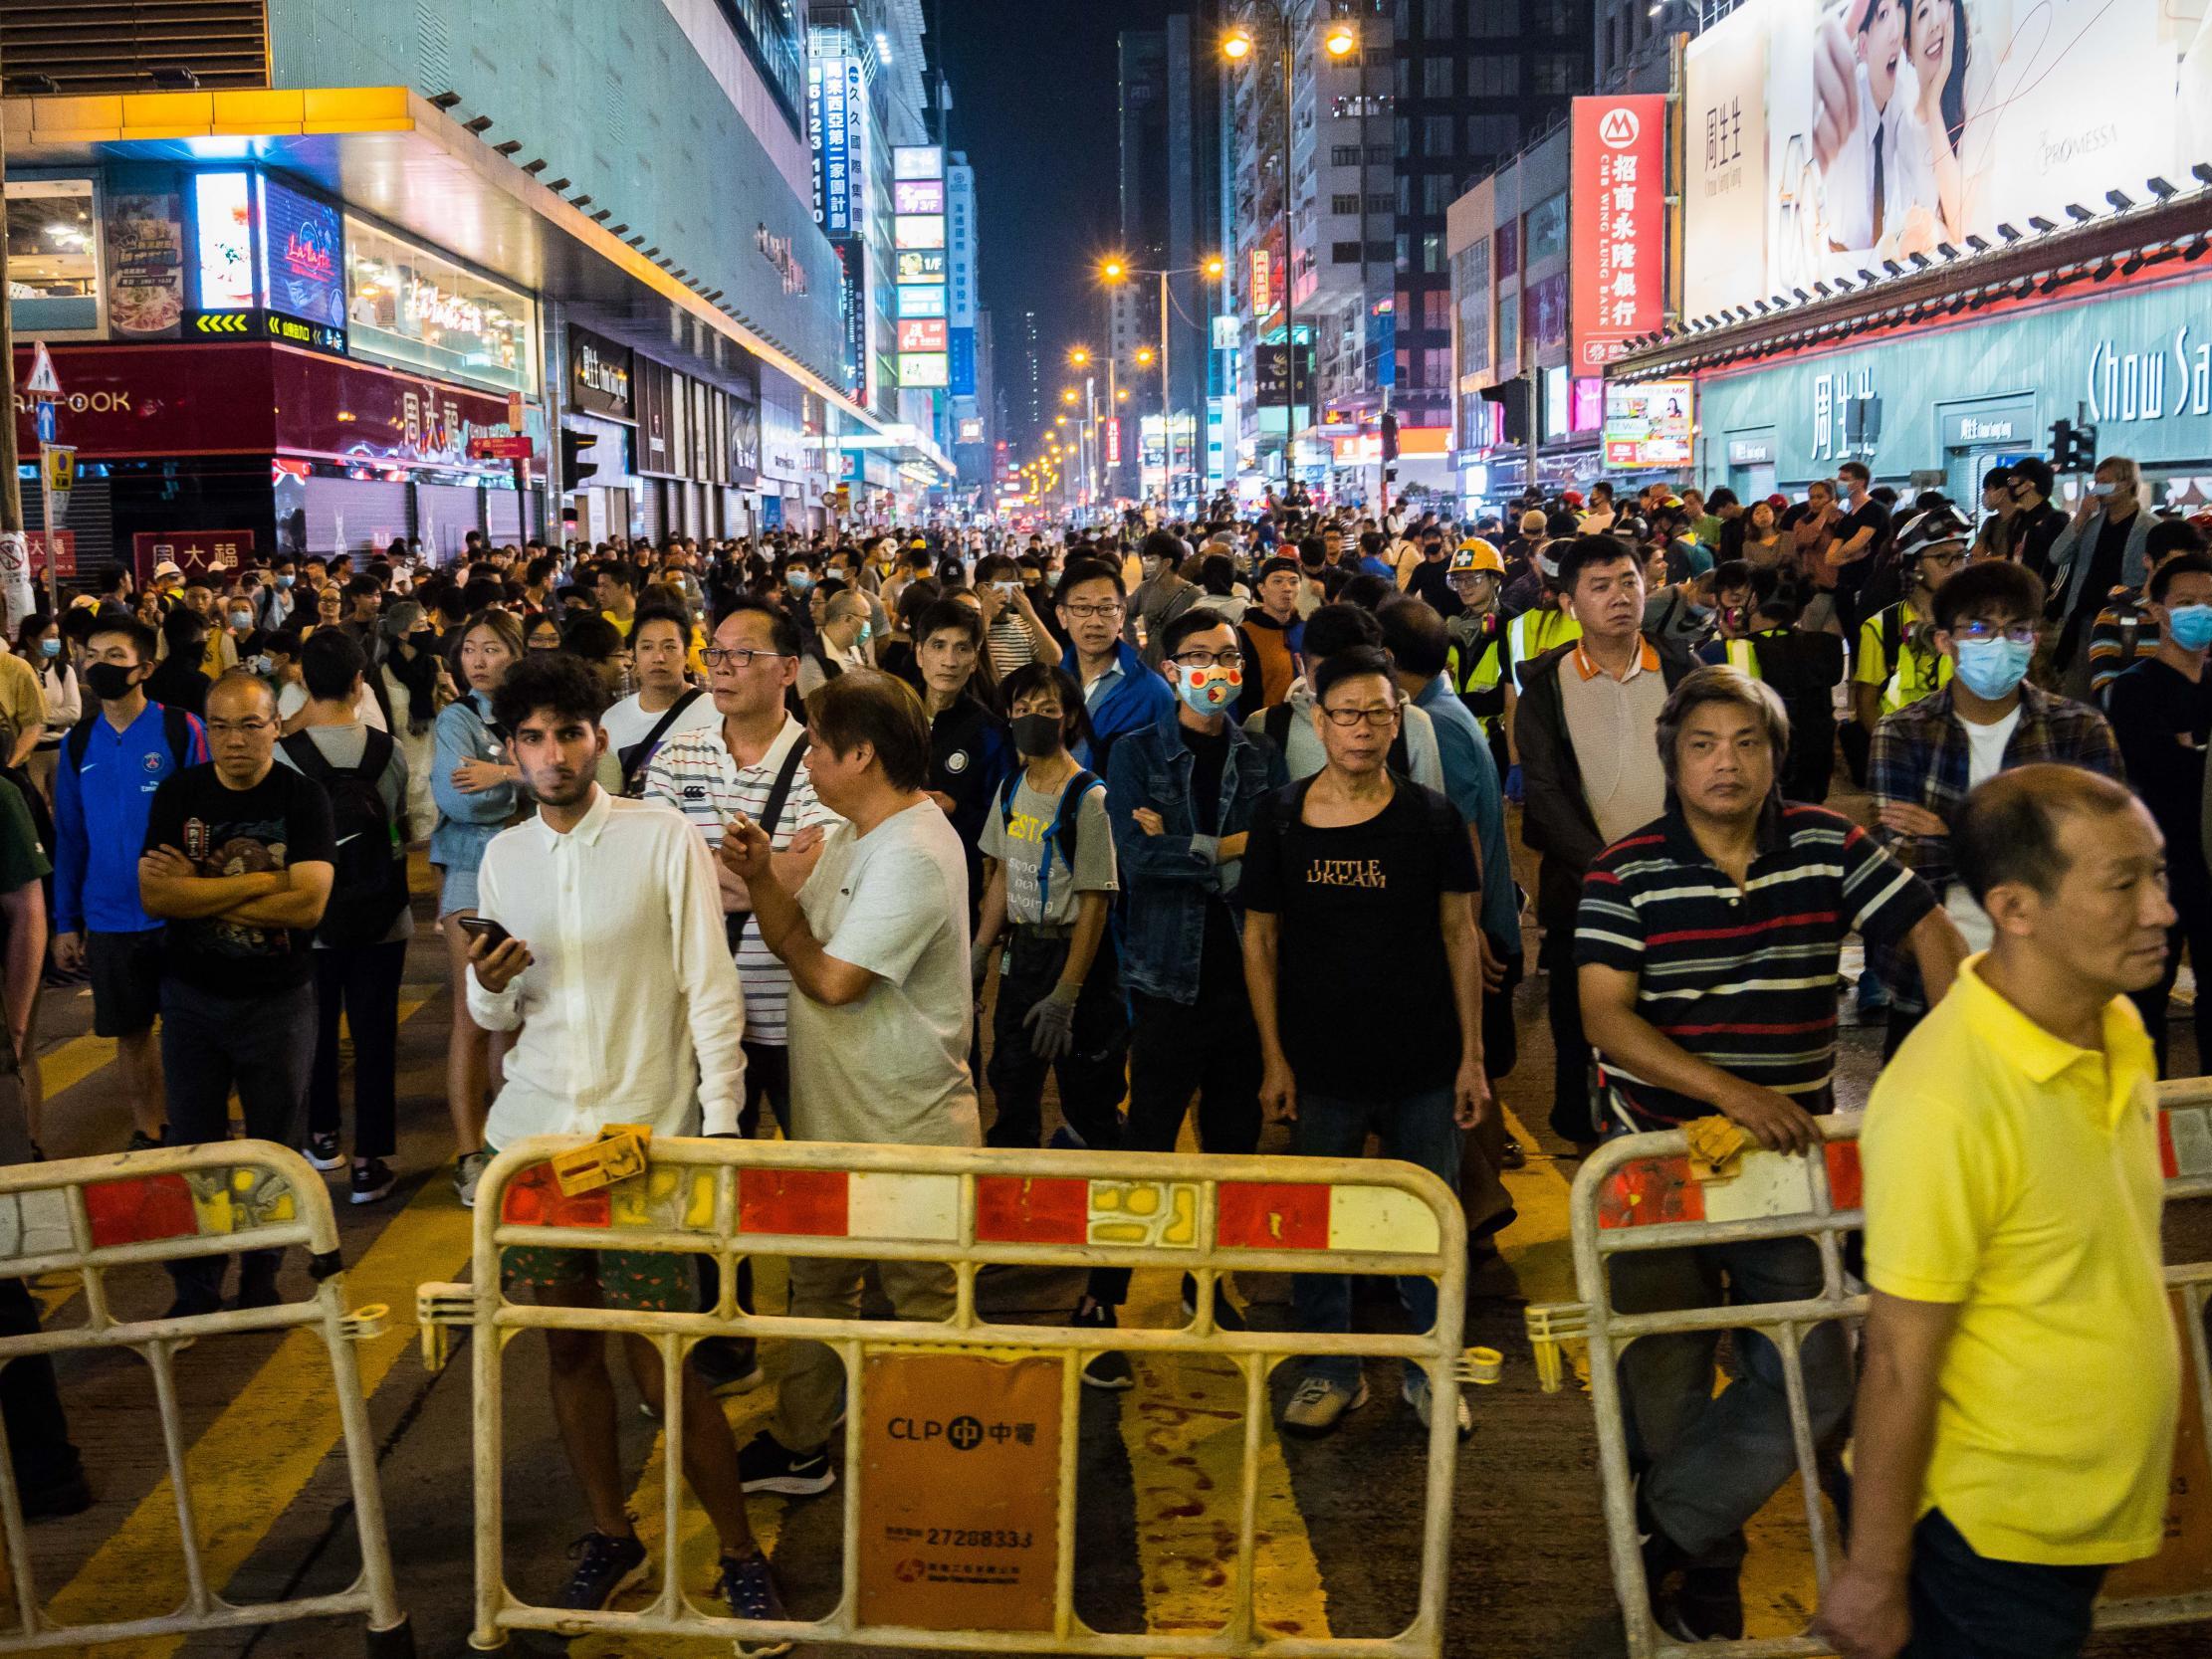 The protests began in early June over a now-shelved extradition bill to mainland China